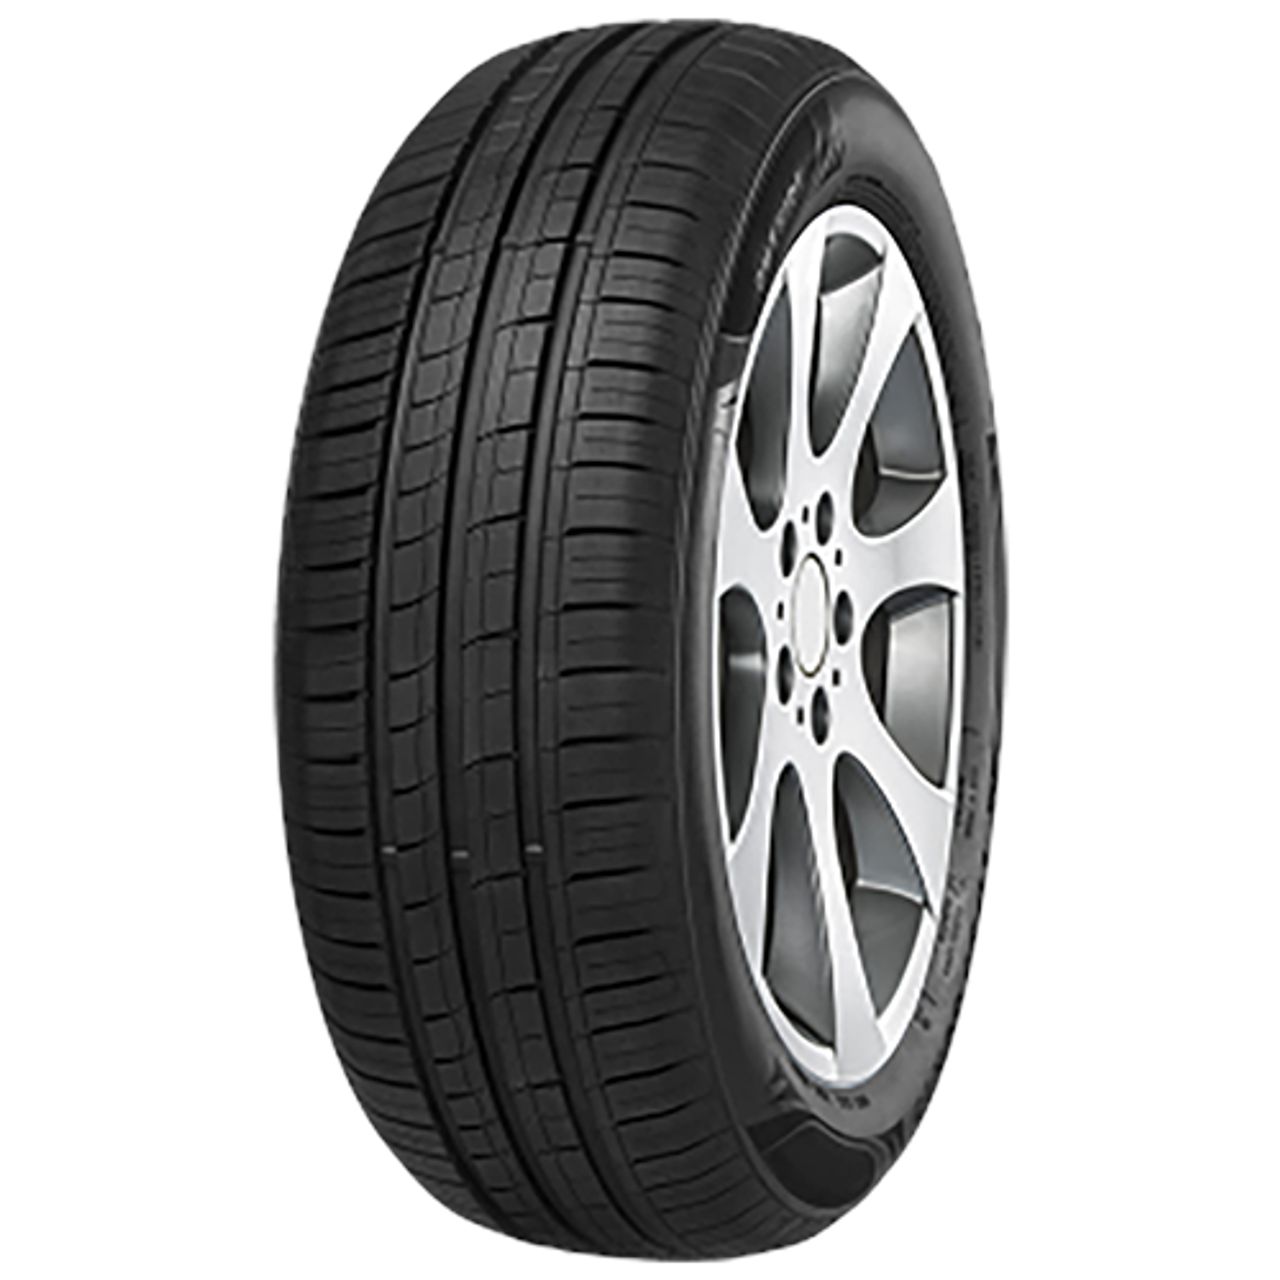 IMPERIAL ECODRIVER 4 145/80R13 75T BSW